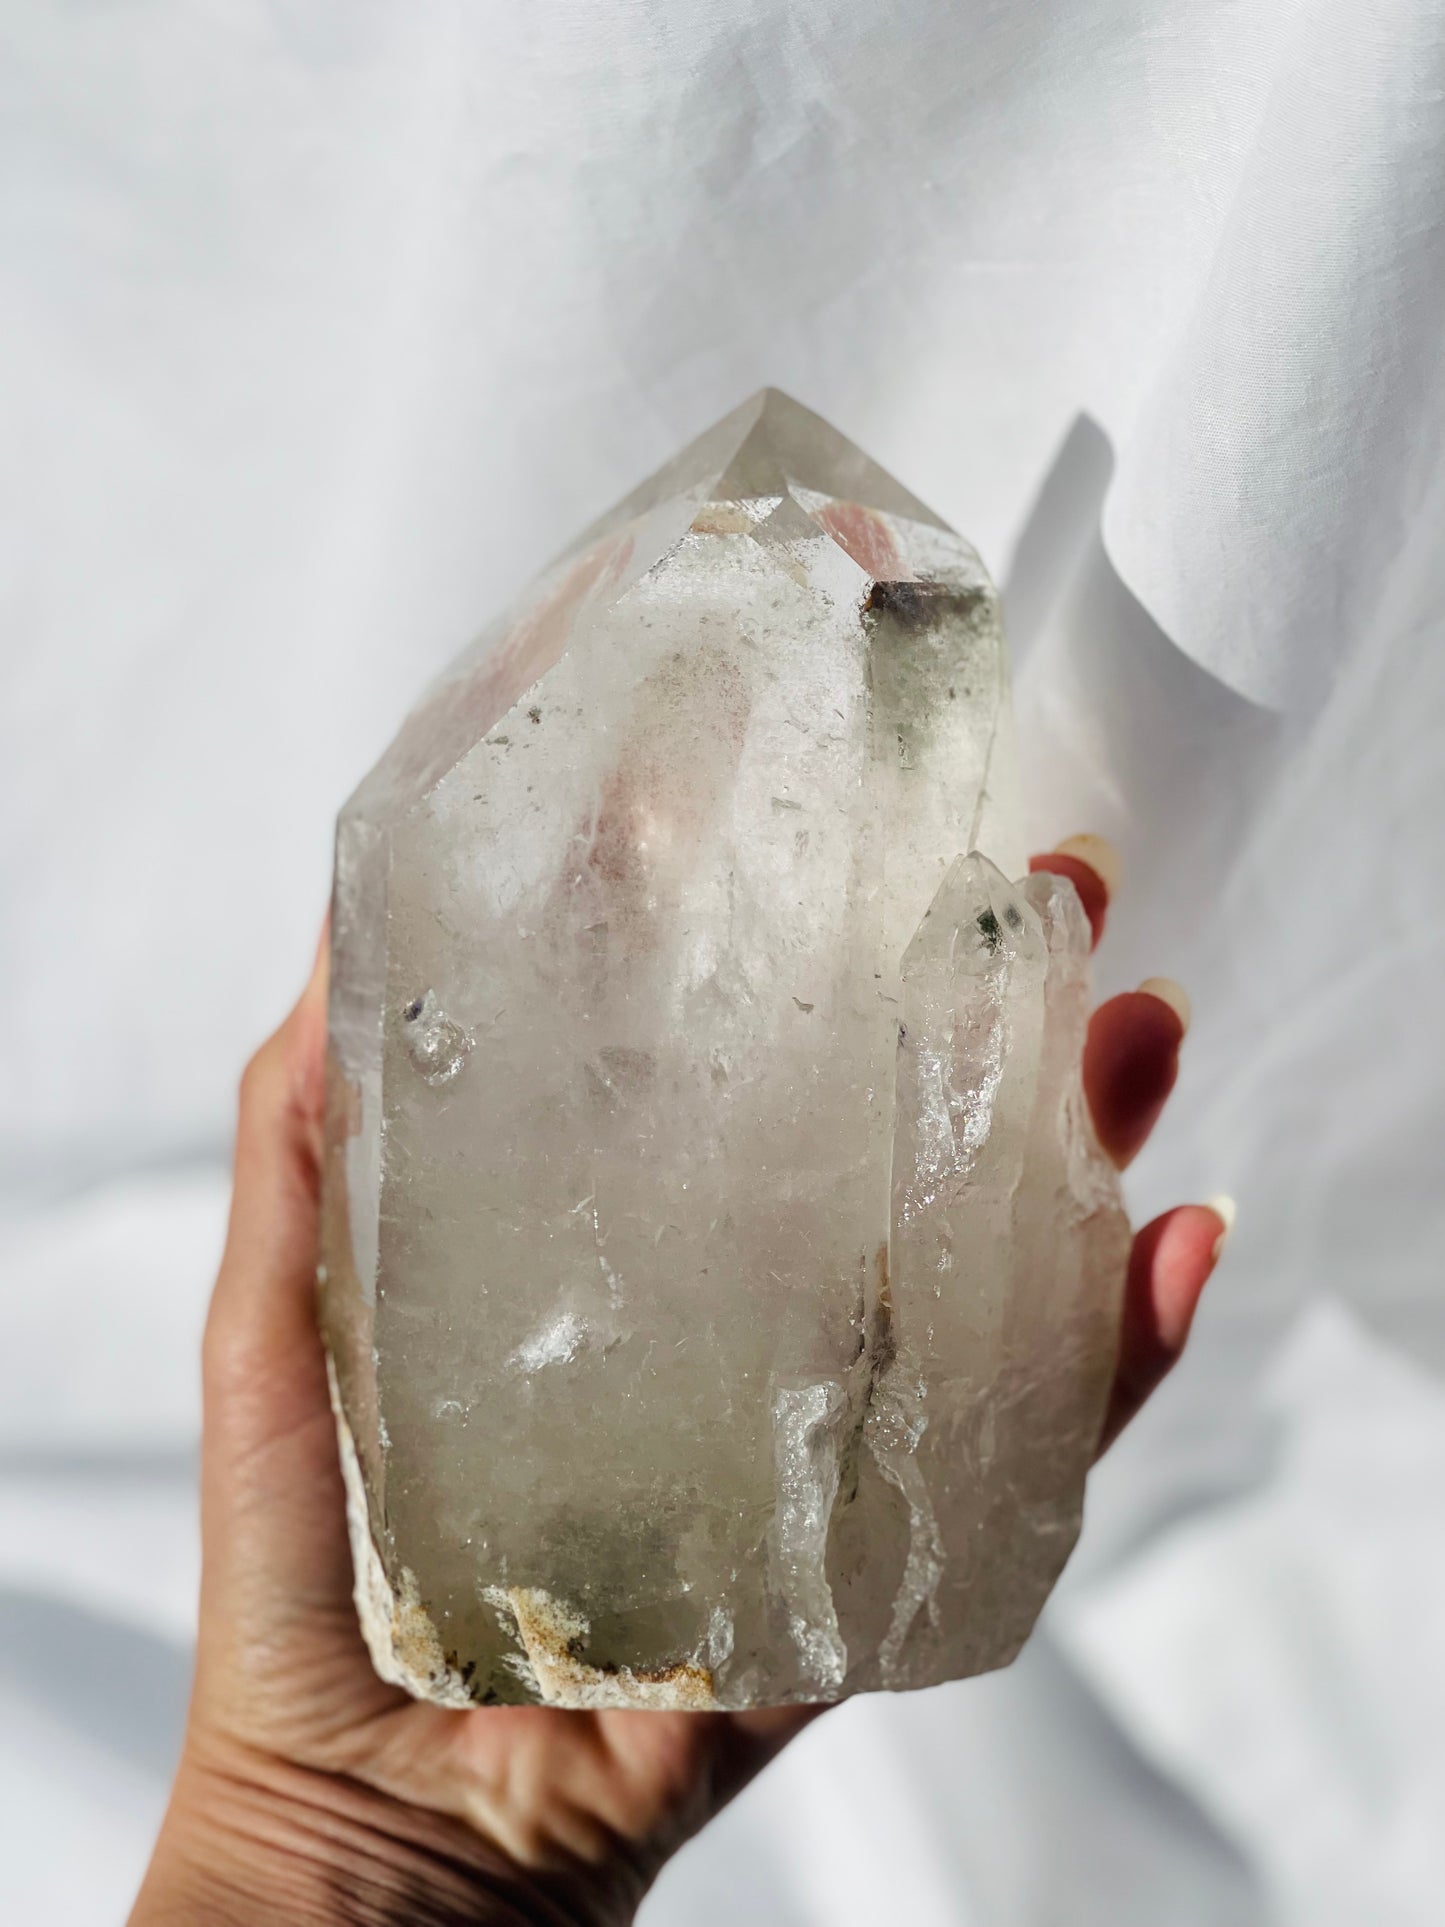 Natural Quartz Point With Chlorite Inclusions